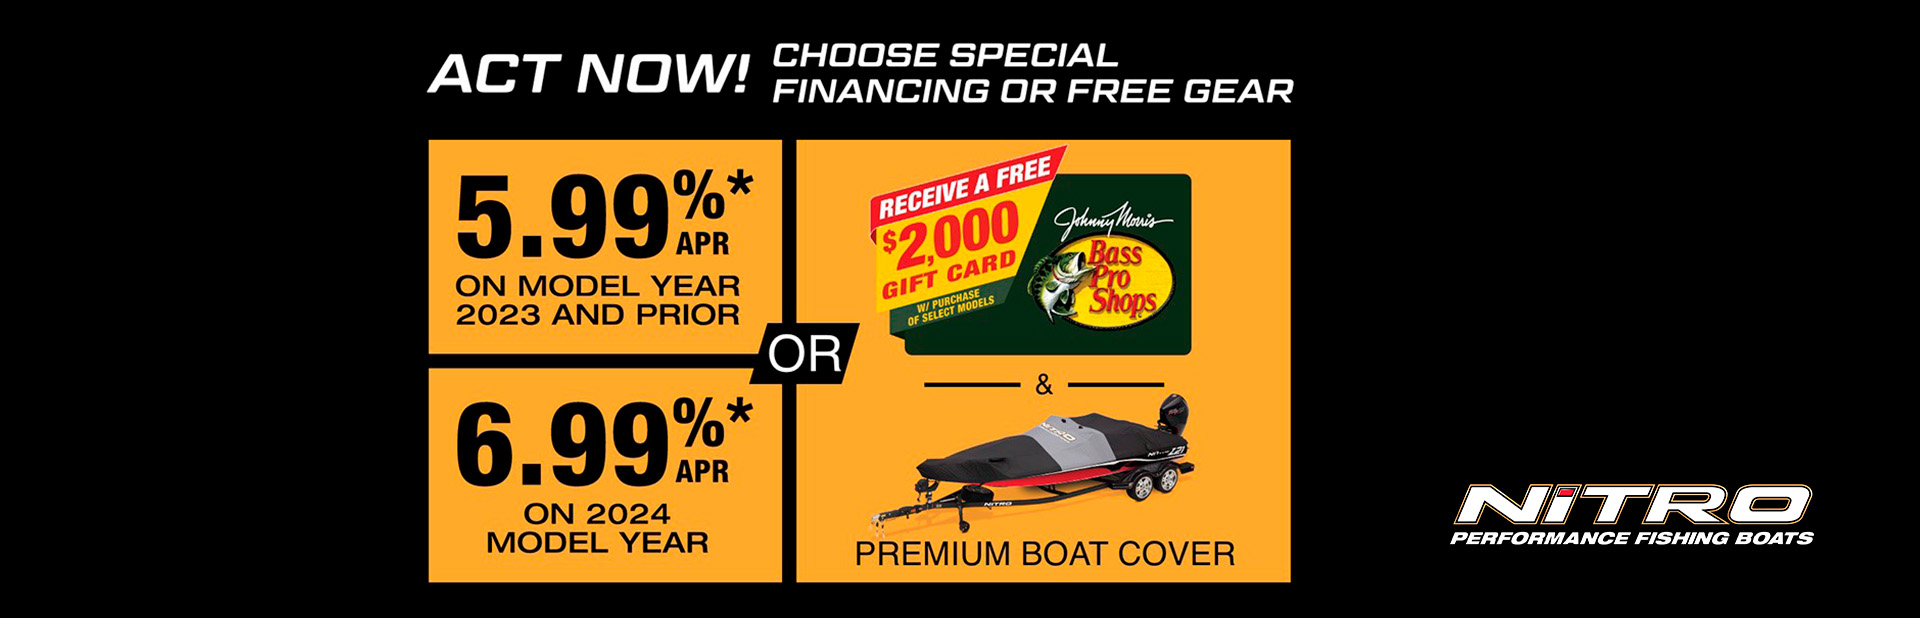 LIMITED TIME ONLY – LOW APR OFFER ON A NEW NITRO!